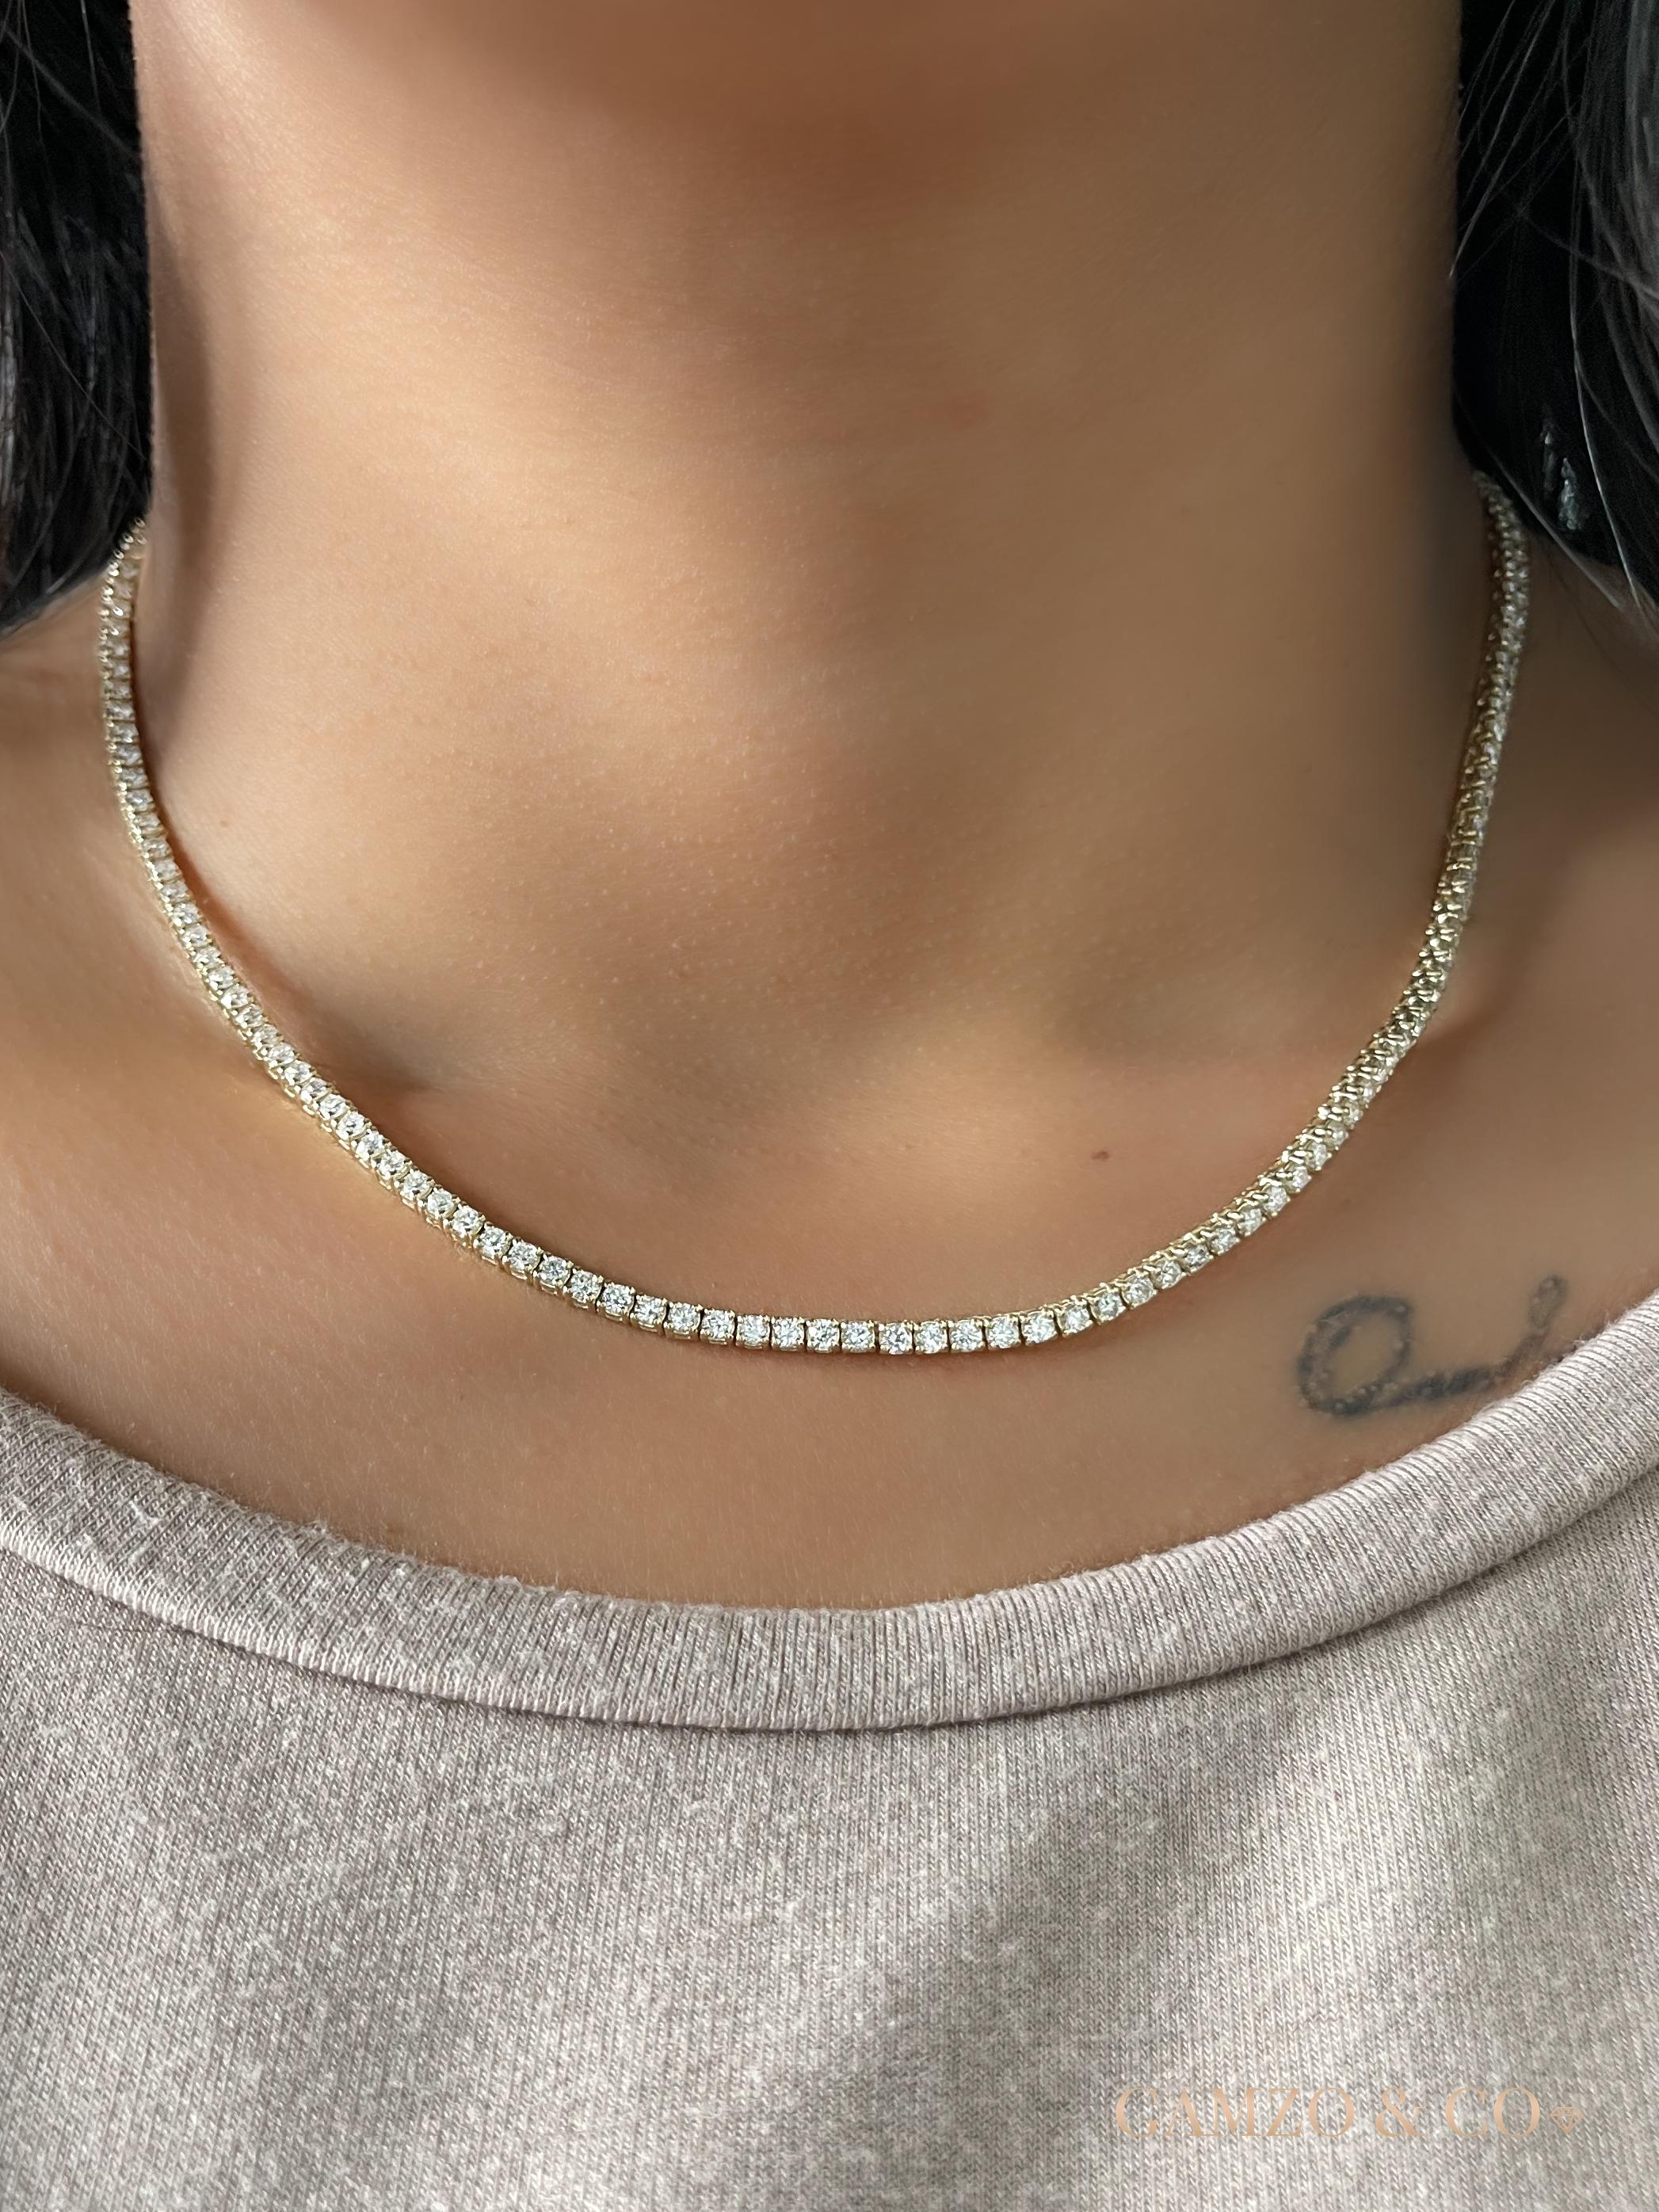 5 Carats of round diamond set on a shared prong setting in 14k white gold to create a timeless necklace. 

Metal: 14k Gold
Diamond Cut: Round
Total Approx. Diamond Carats: 5ct
Diamond Clarity: VS
Diamond Color: F-G
Size: 16
Color: White